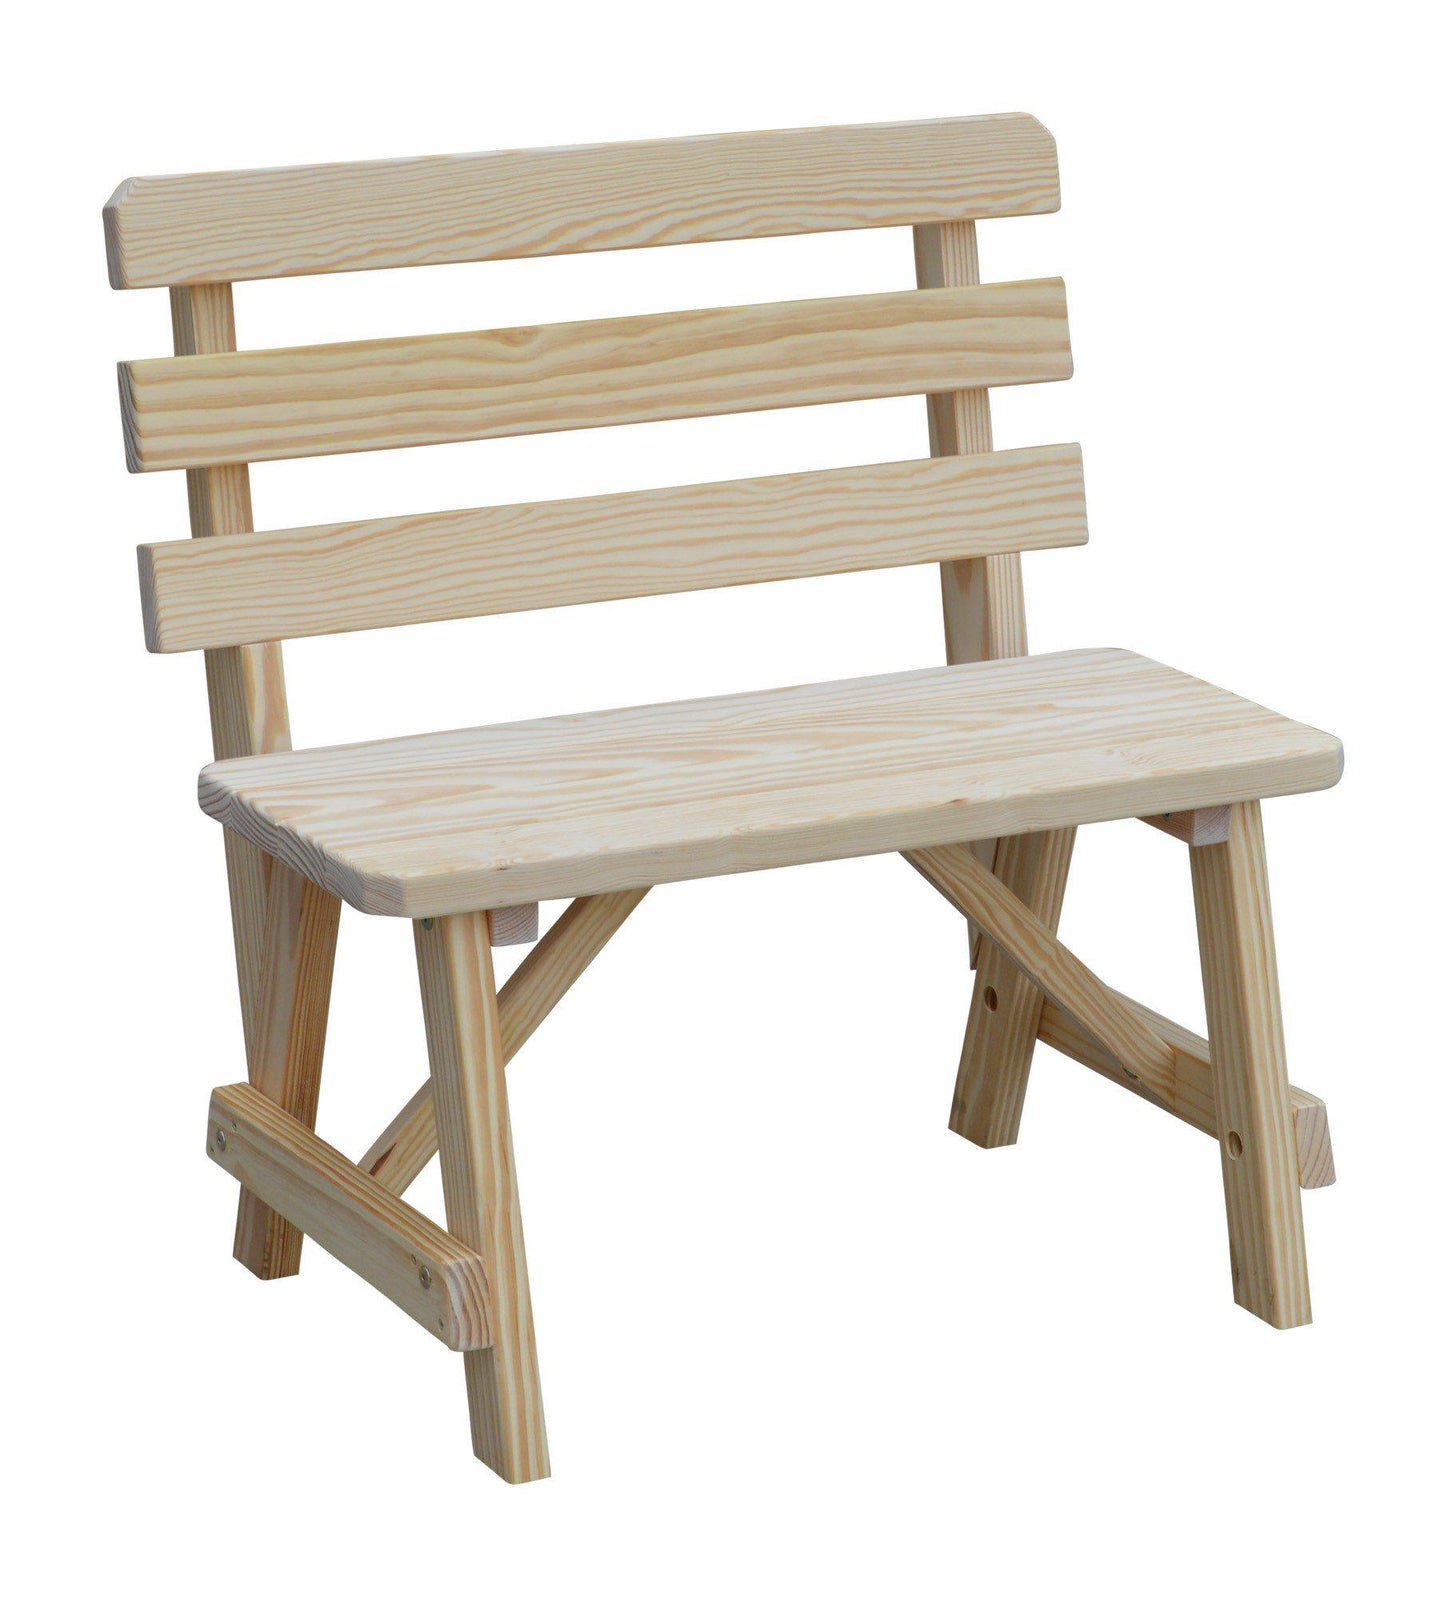 A&L Furniture Co. Yellow Pine 33" Traditional Backed Bench Only - LEAD TIME TO SHIP 10 BUSINESS DAYS